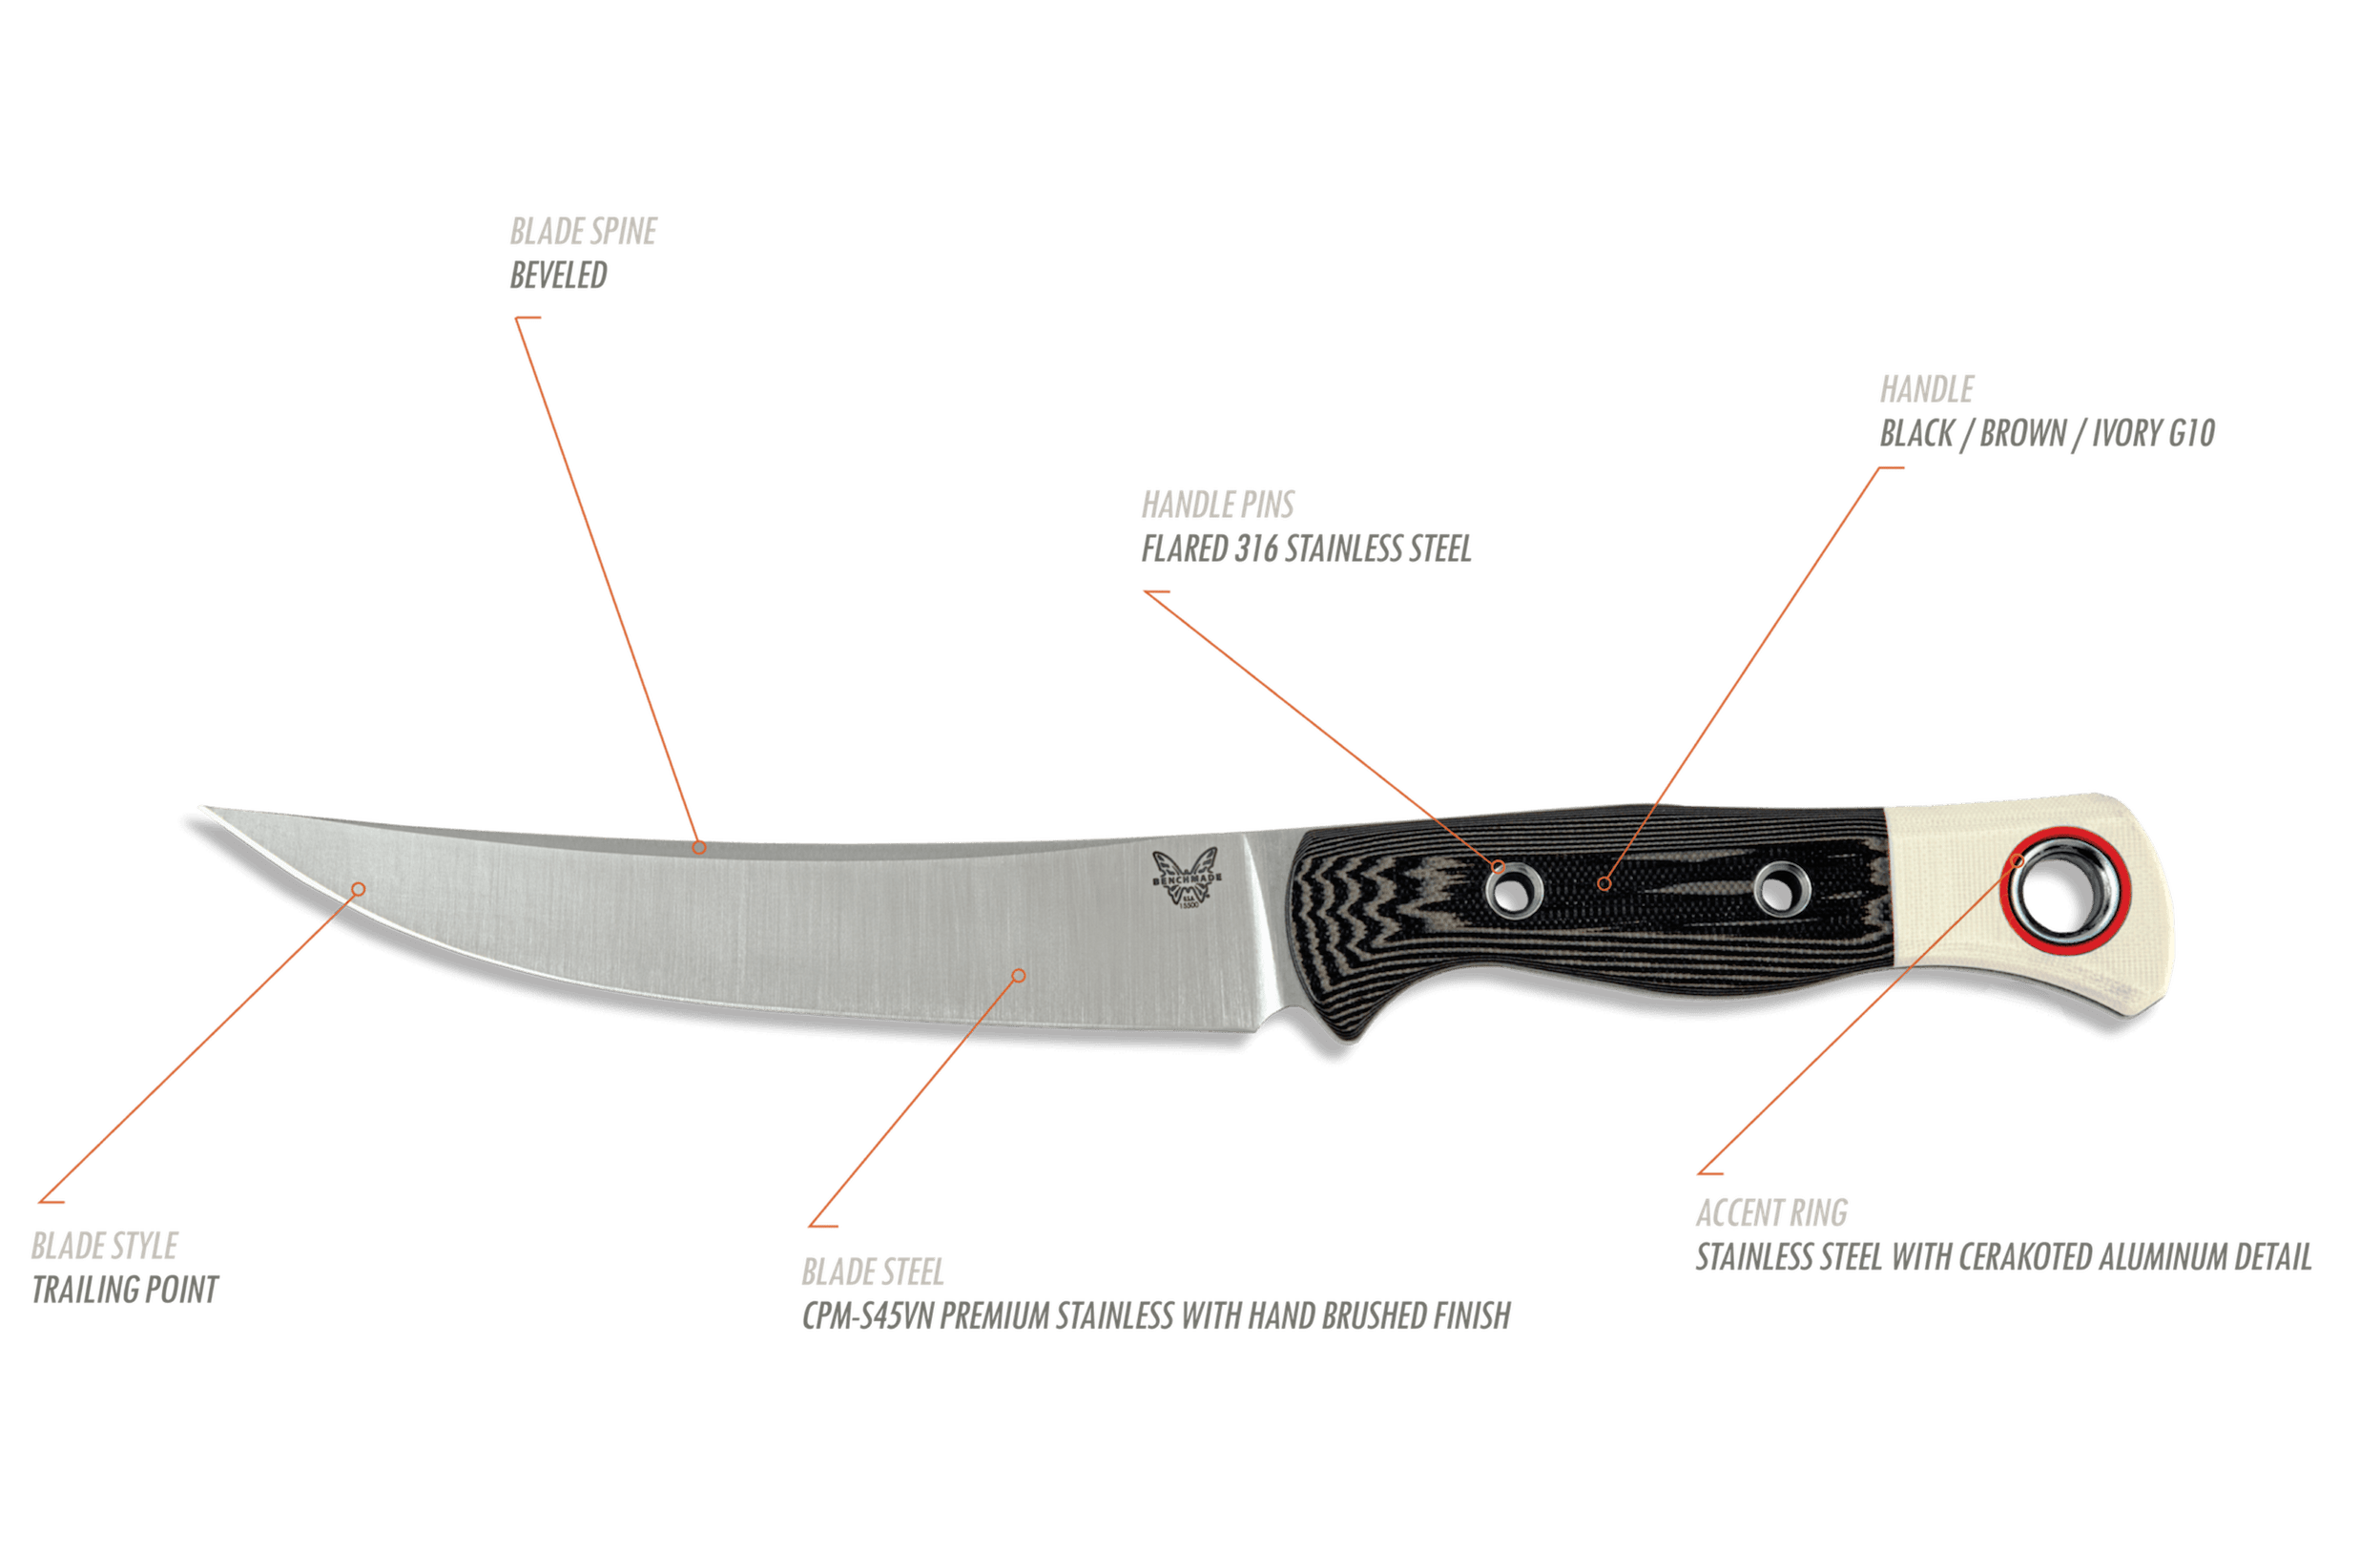 The Meatcrafter Knife - Steven Rinella Edition